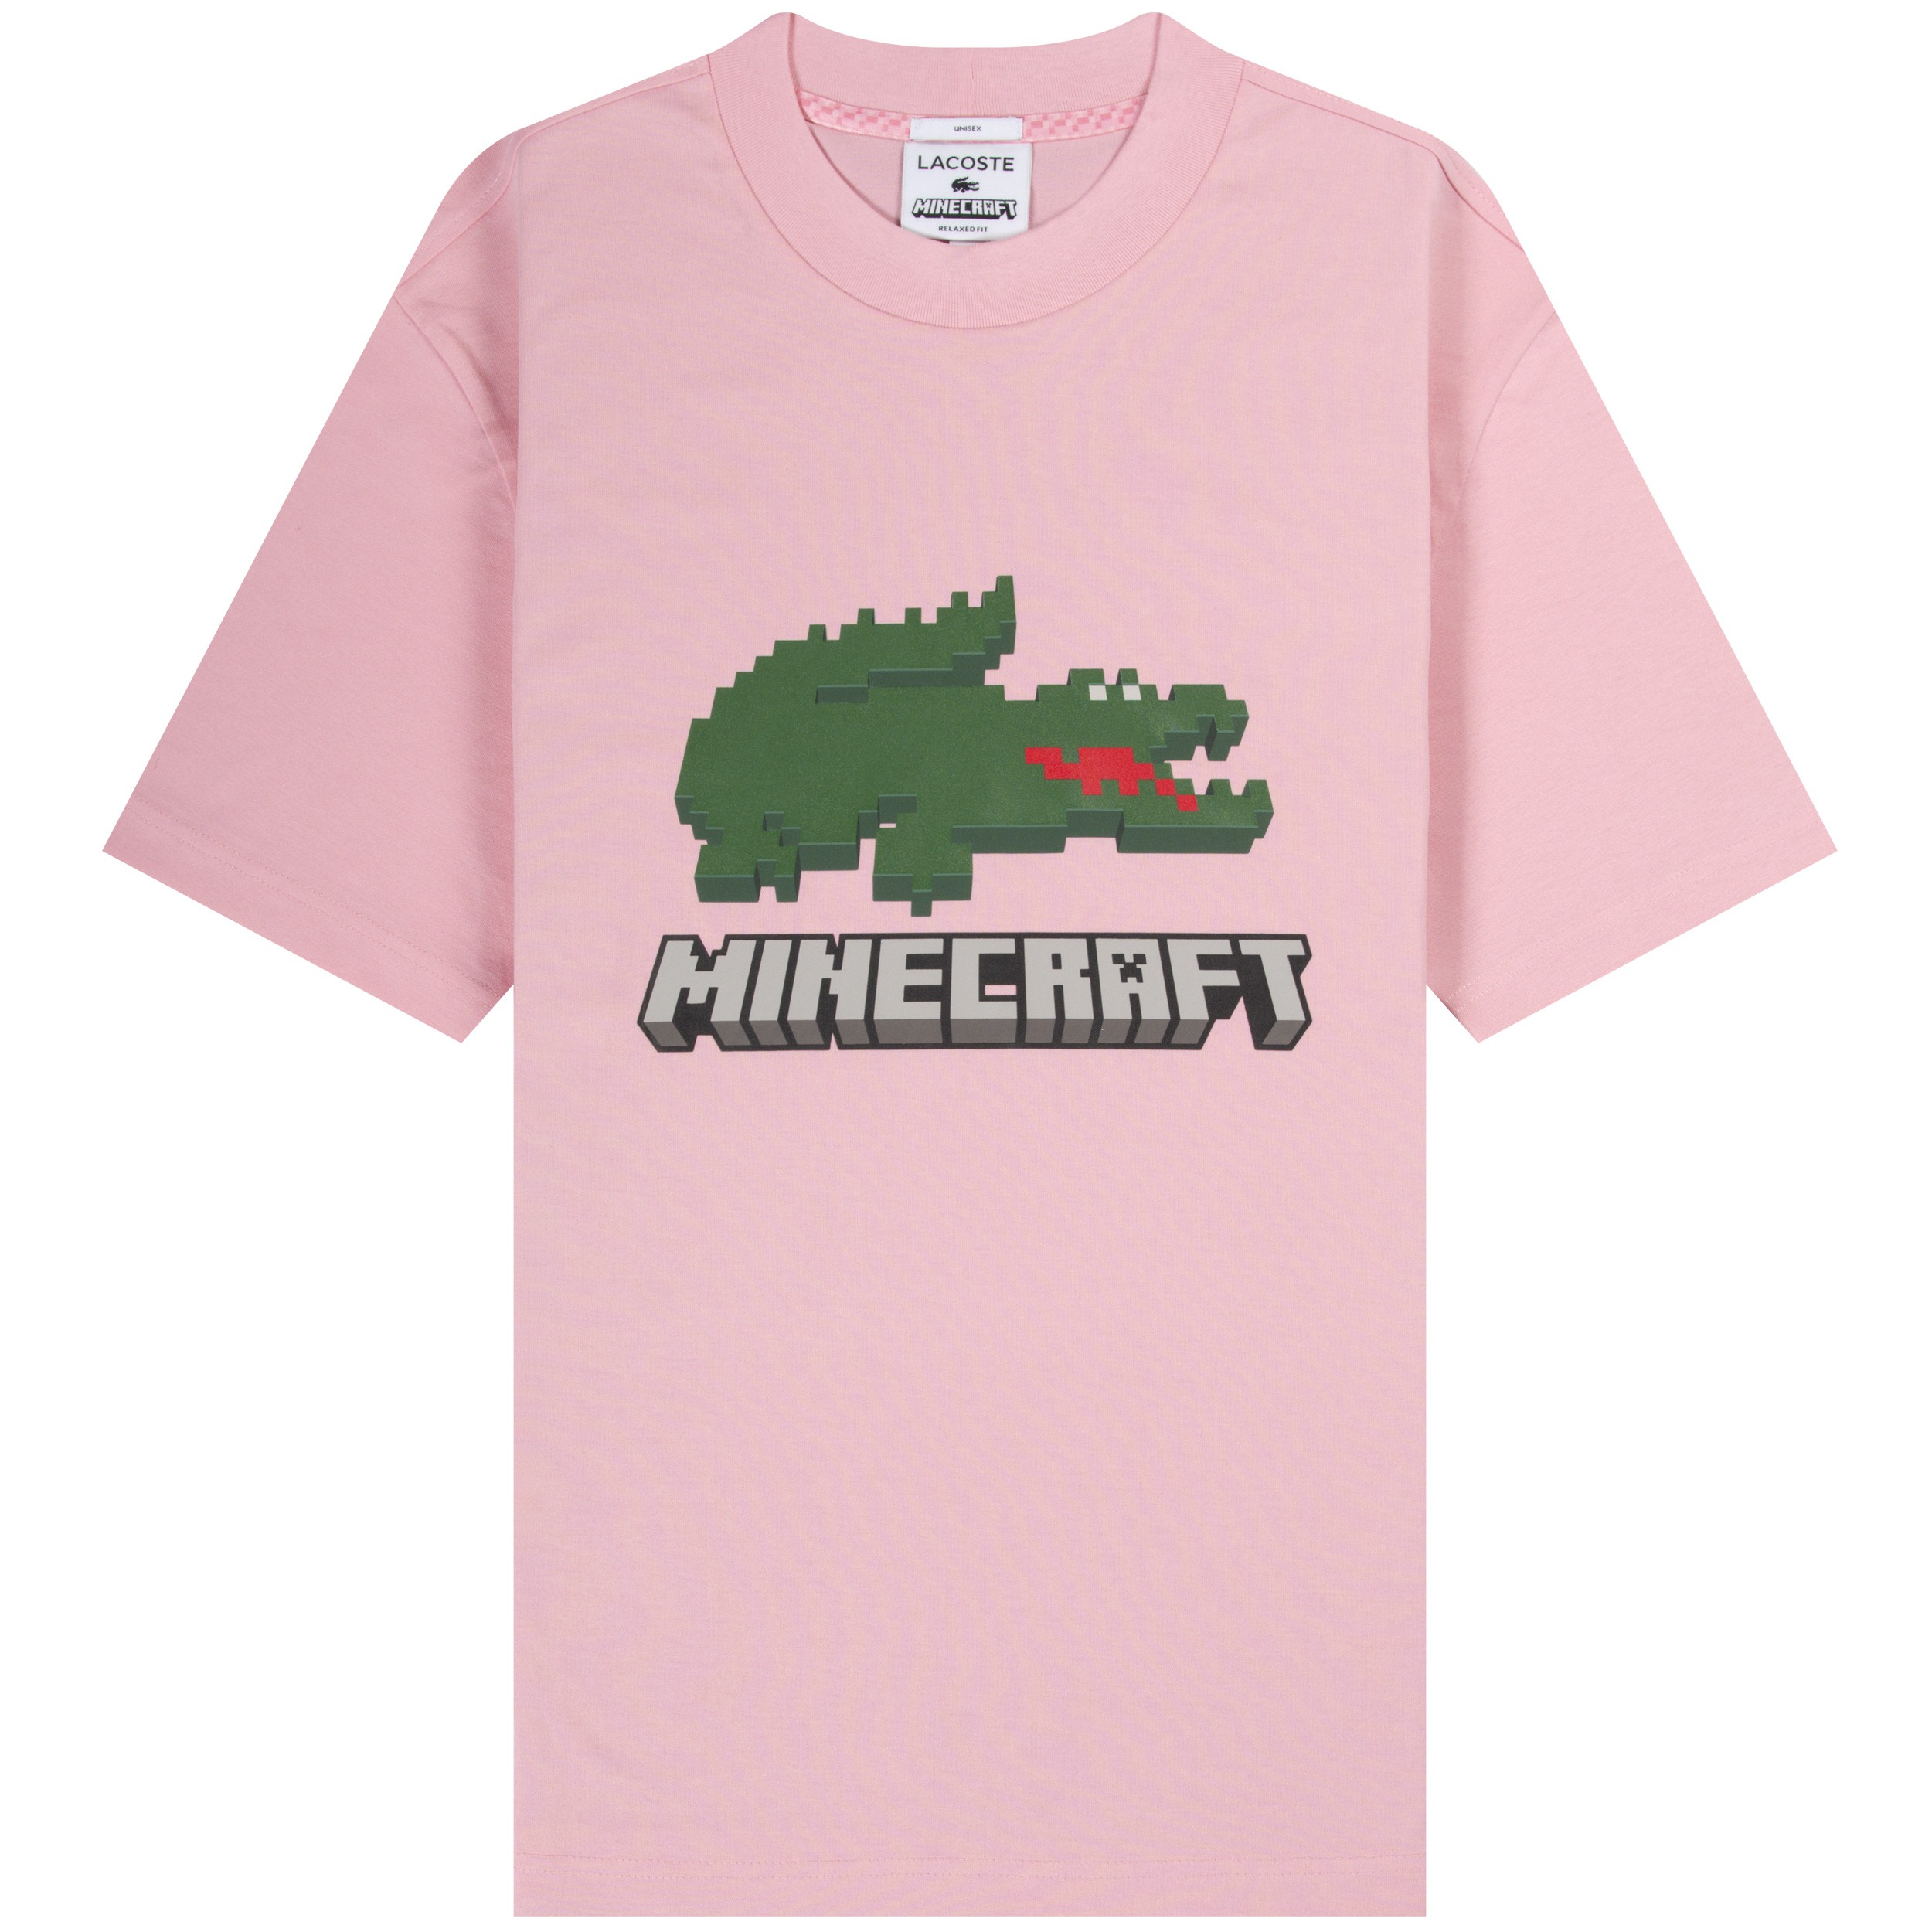 Lacoste X Minecraft 'Printed Logo' T-Shirt Baby Pink